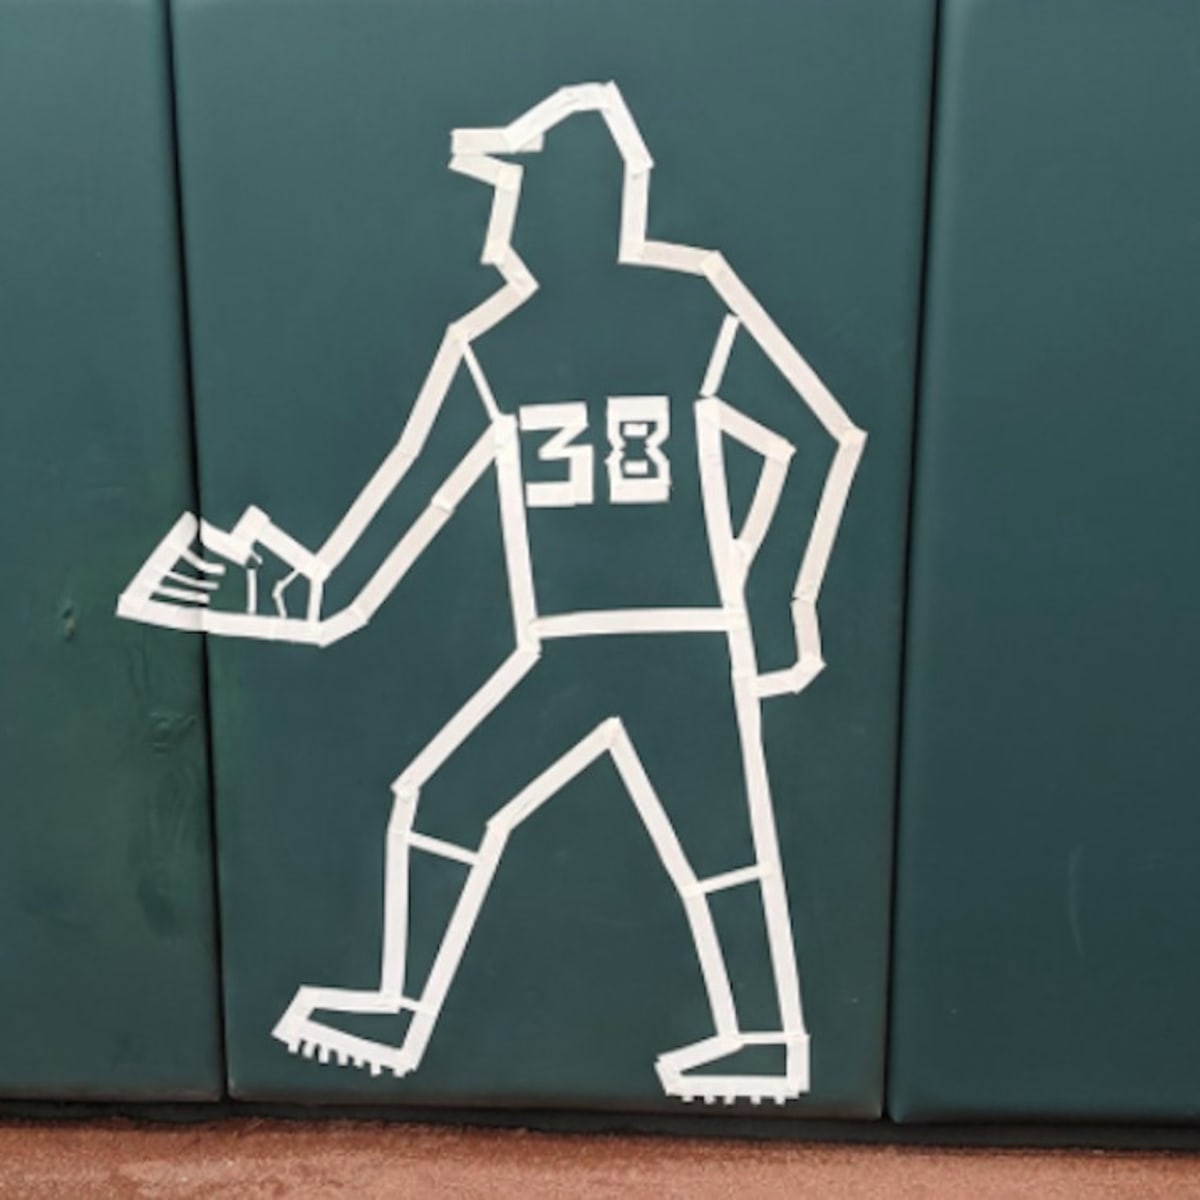 Orioles grounds crew draws Rob Refsnyder's outline on wall after crash -  Sports Illustrated Minnesota Sports, News, Analysis, and More